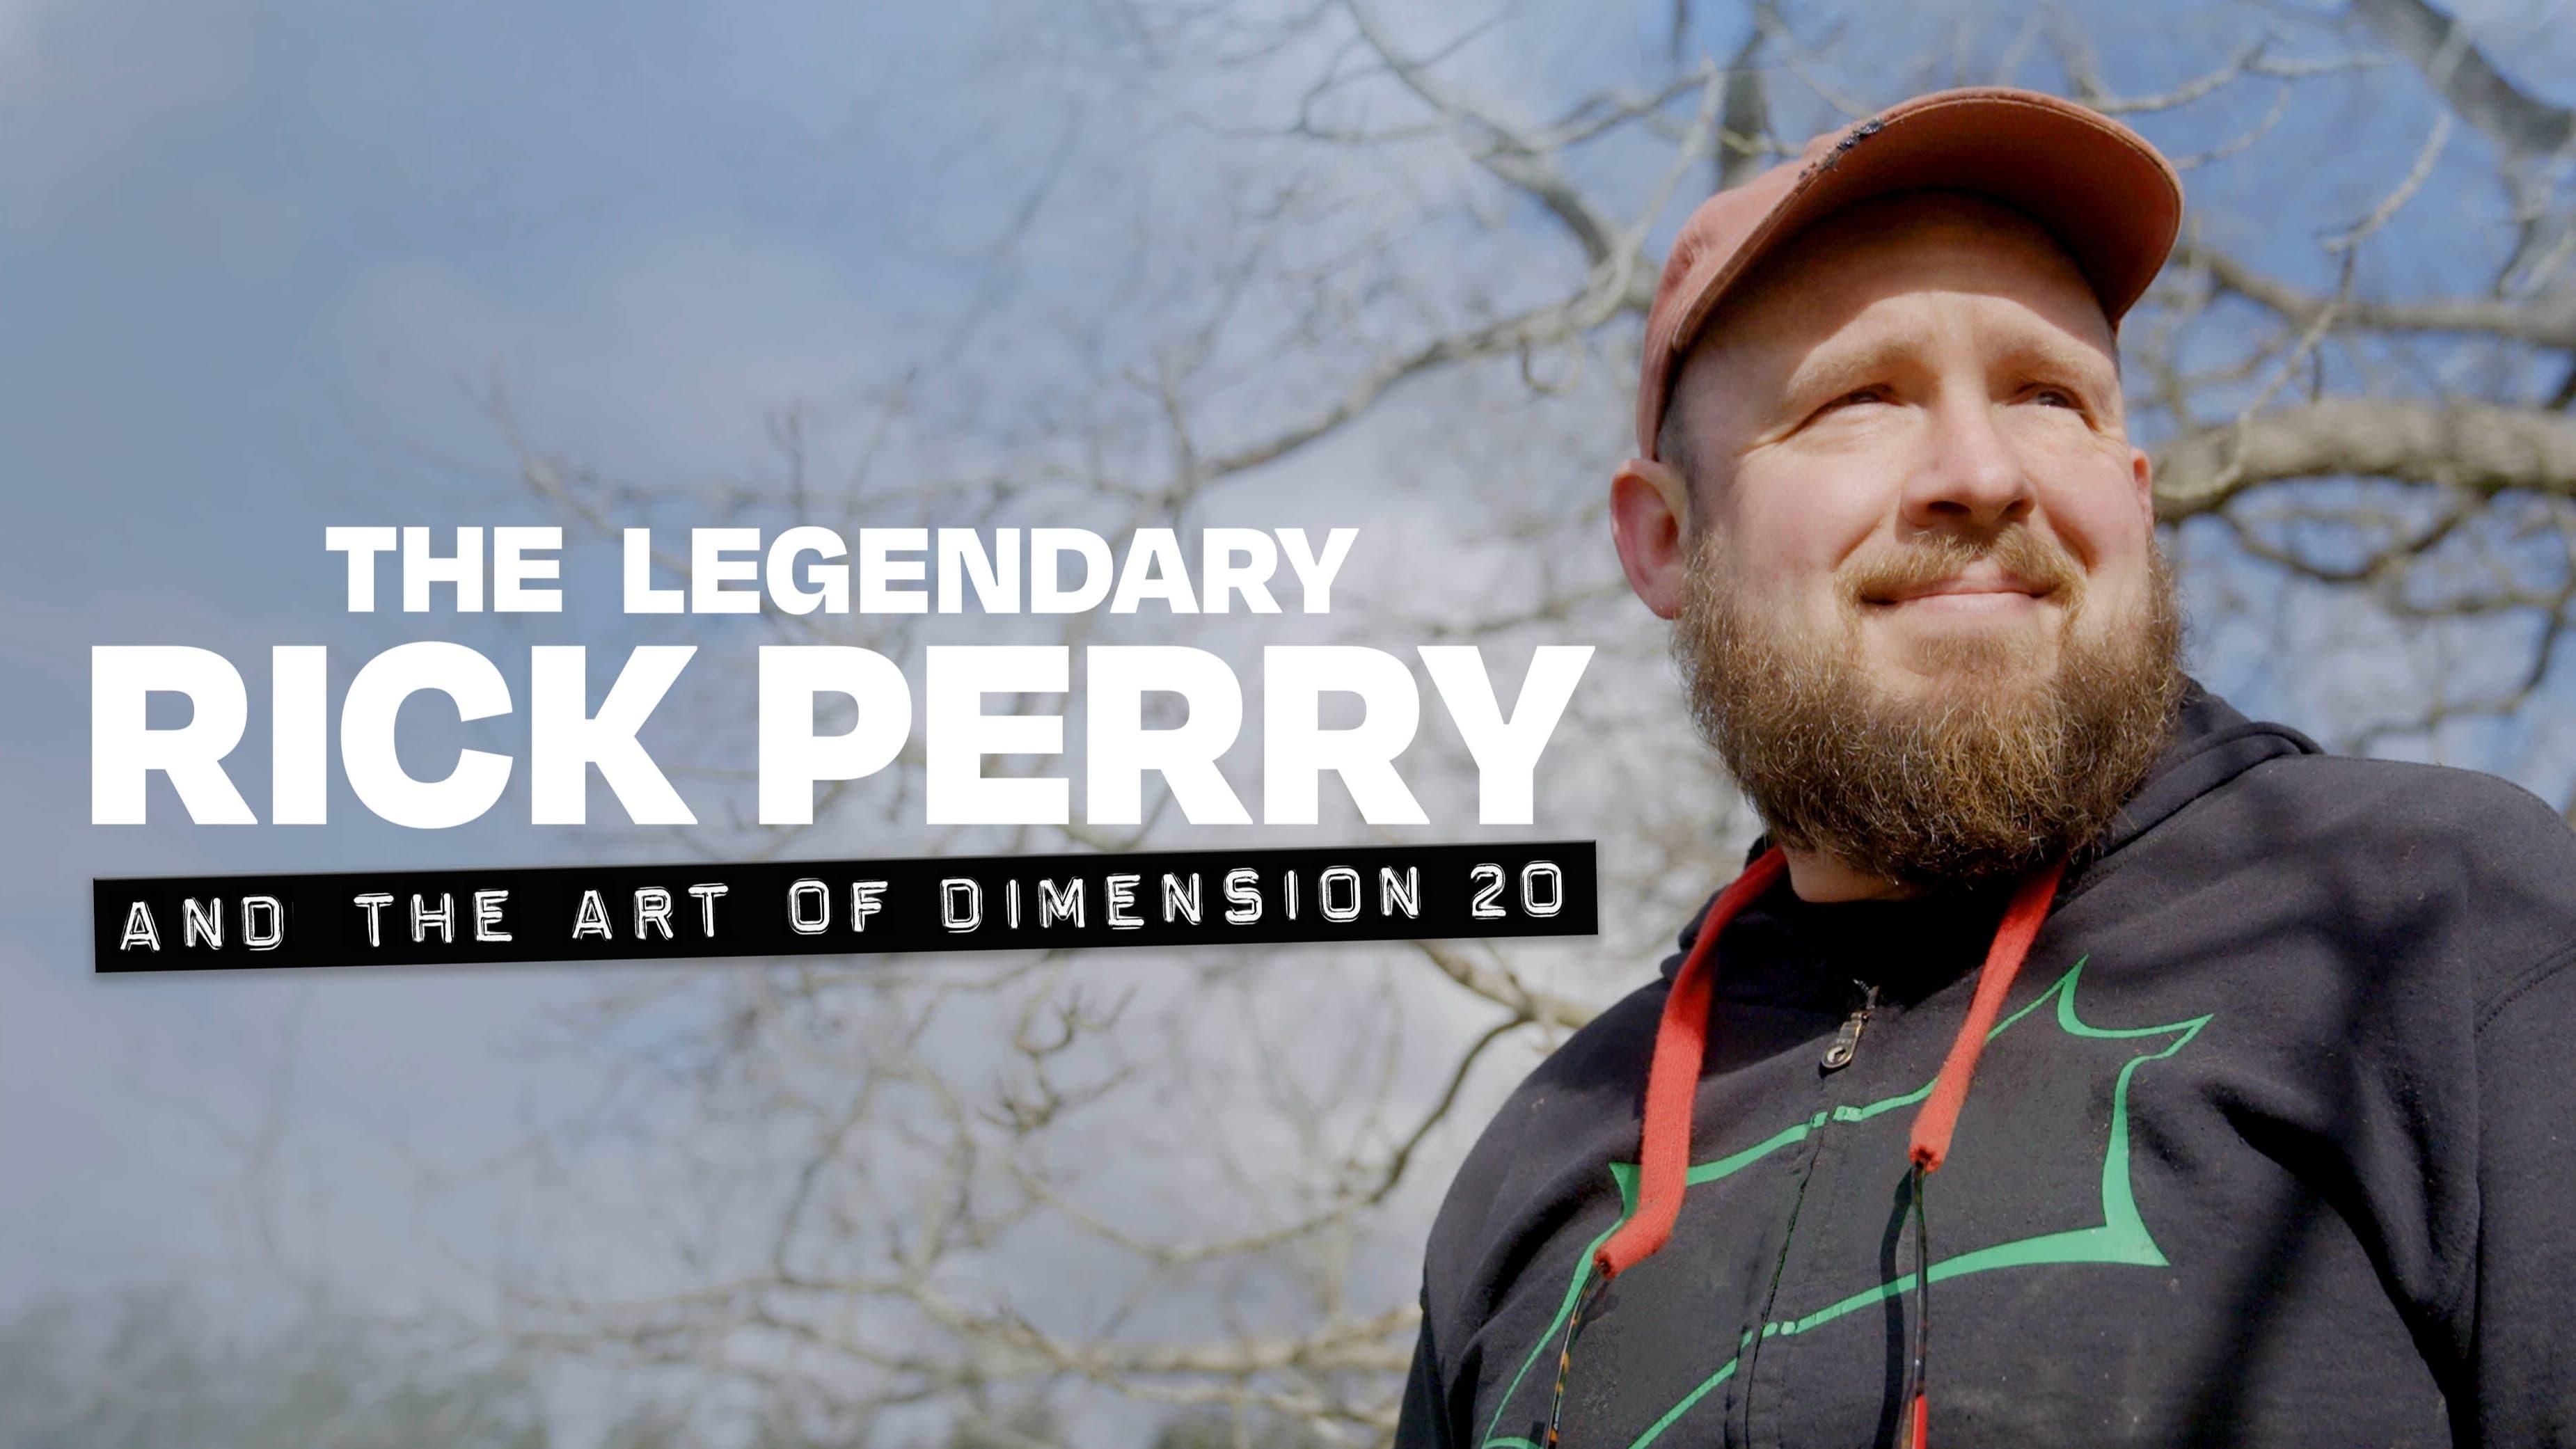 The Legendary Rick Perry and the Art of Dimension 20 backdrop